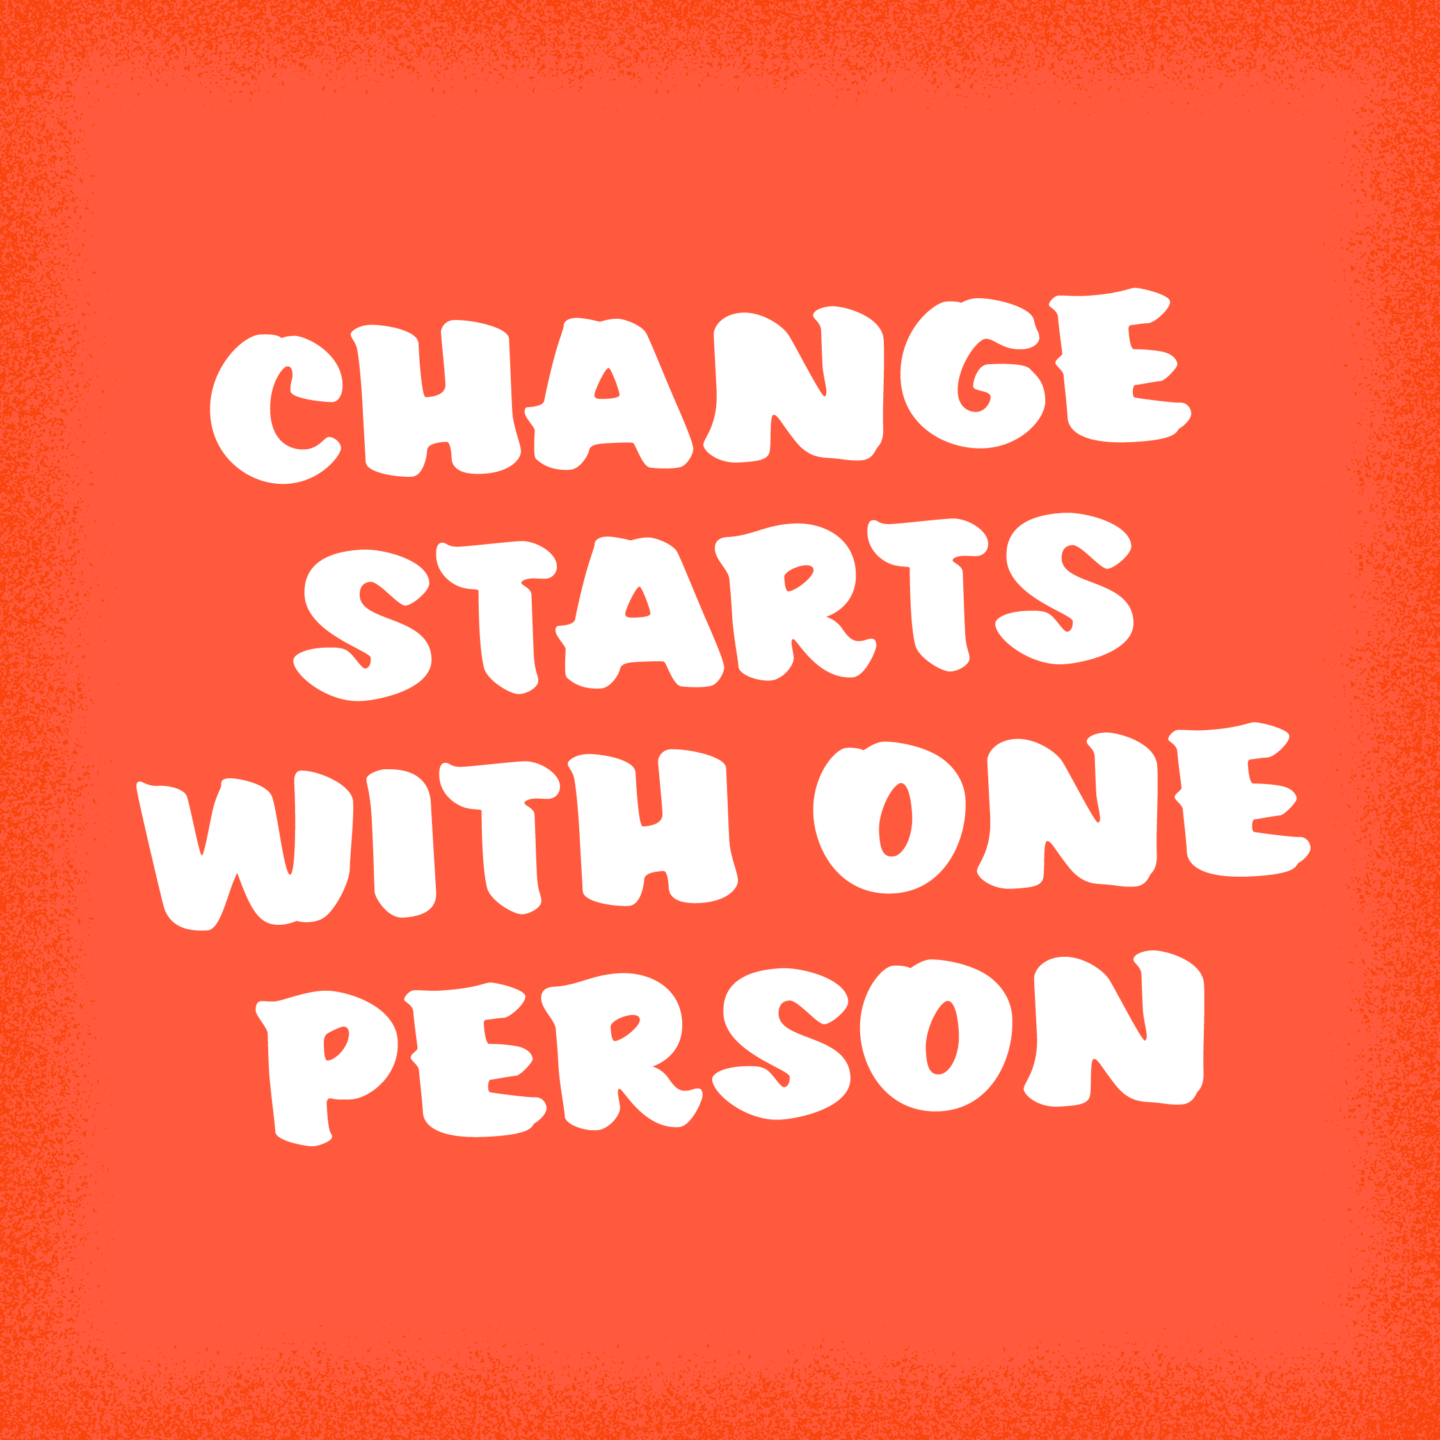 Graphic that says "Change starts with one person"